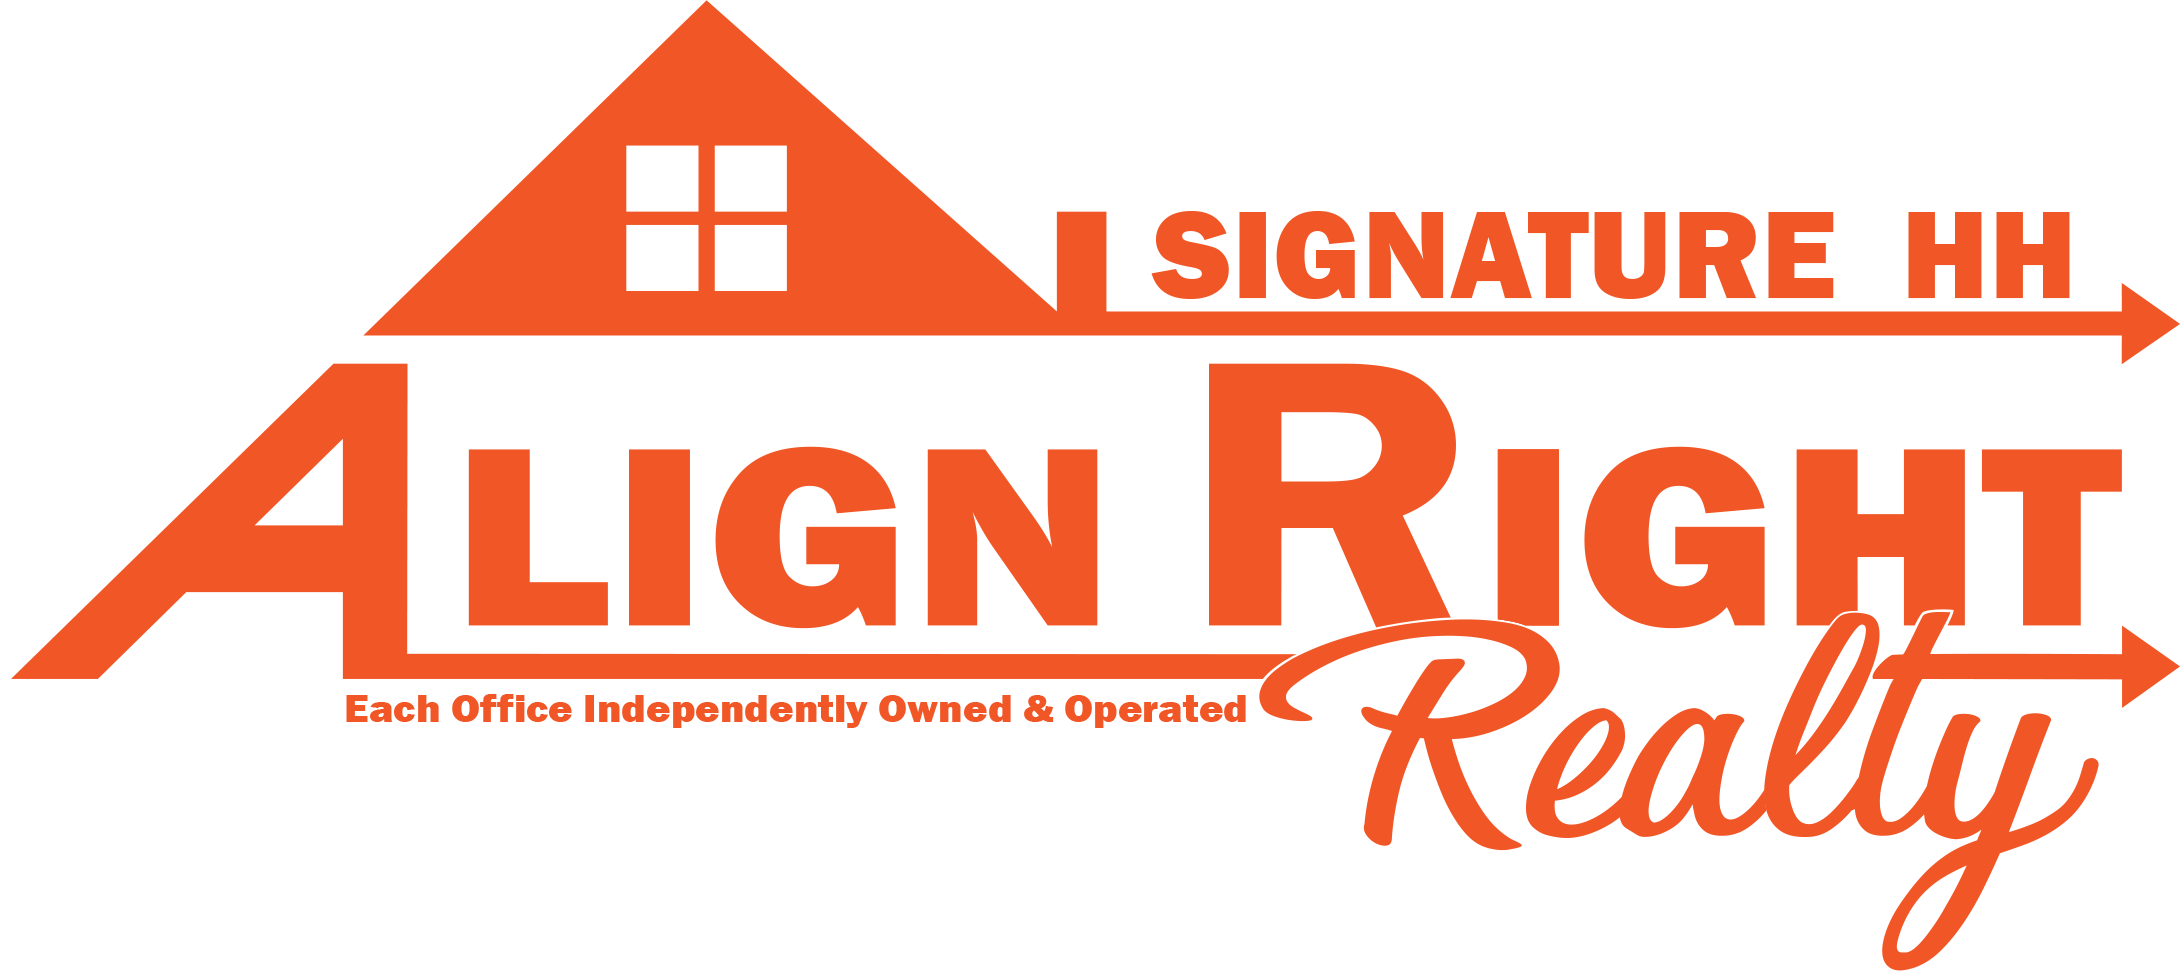 Align Right Realty Signature HH